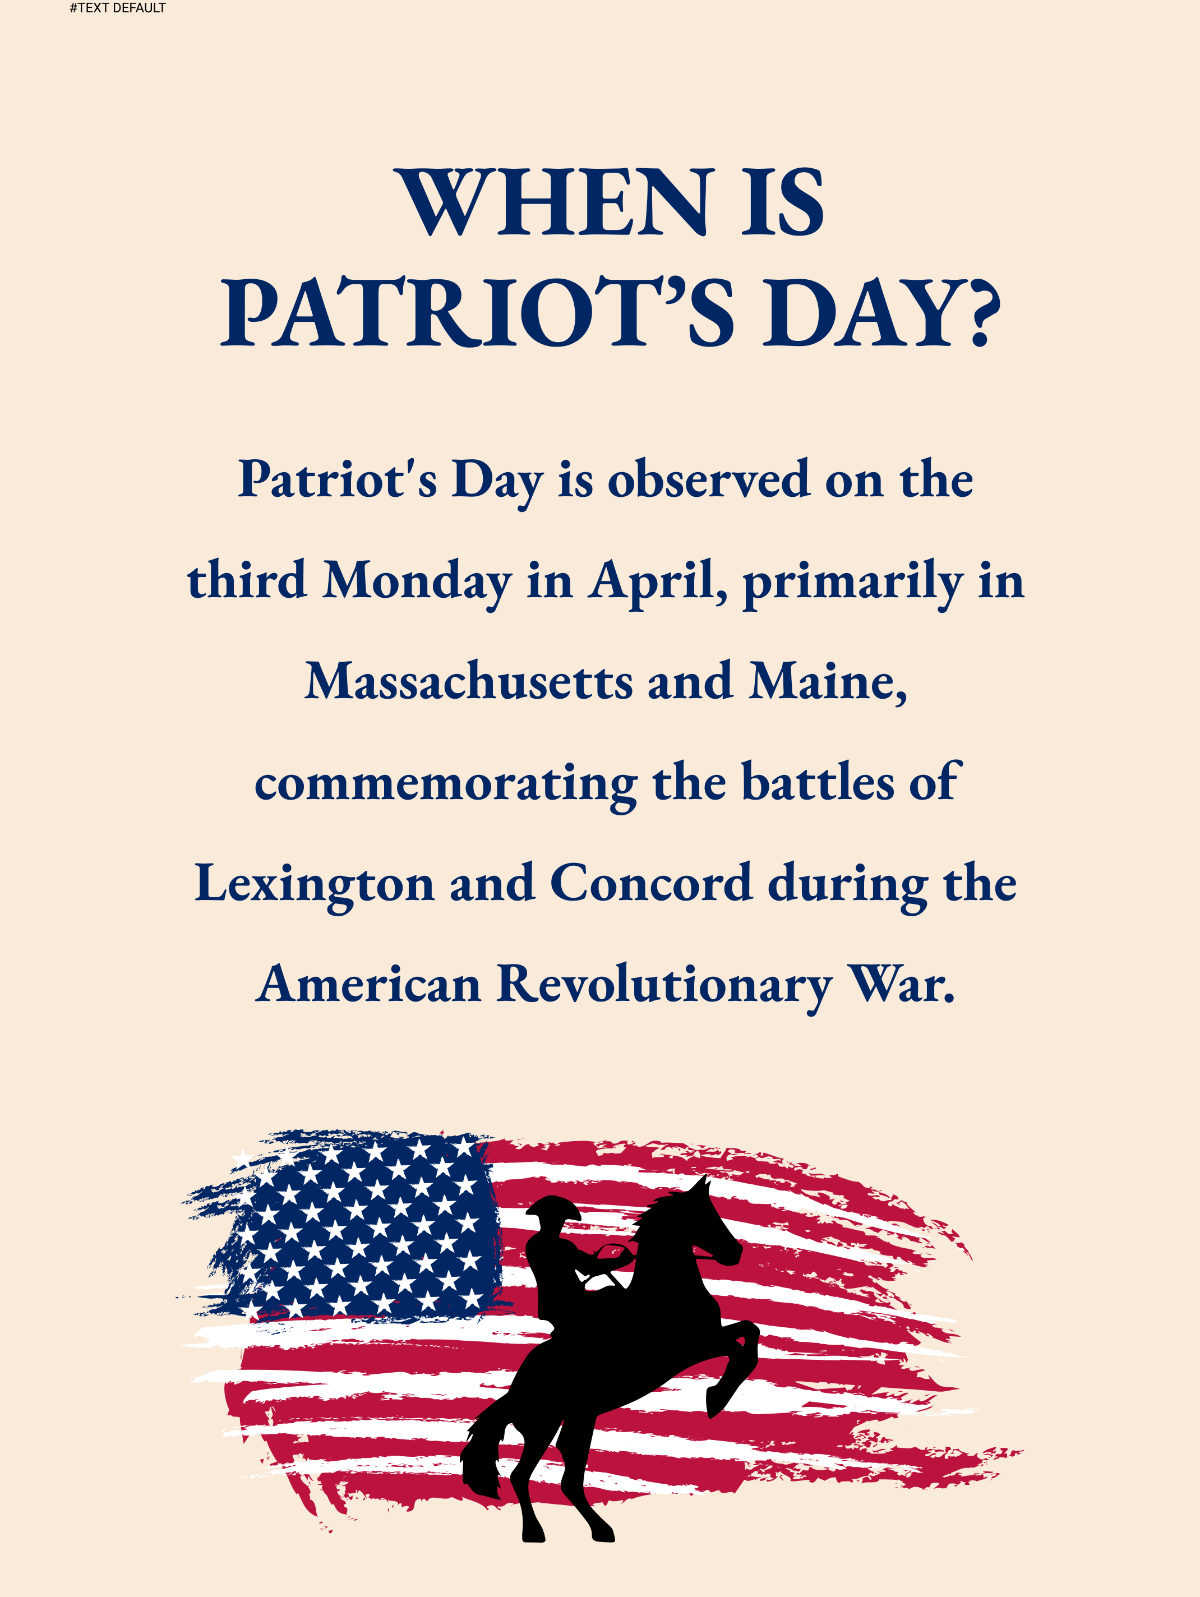 When is Patriot's Day?